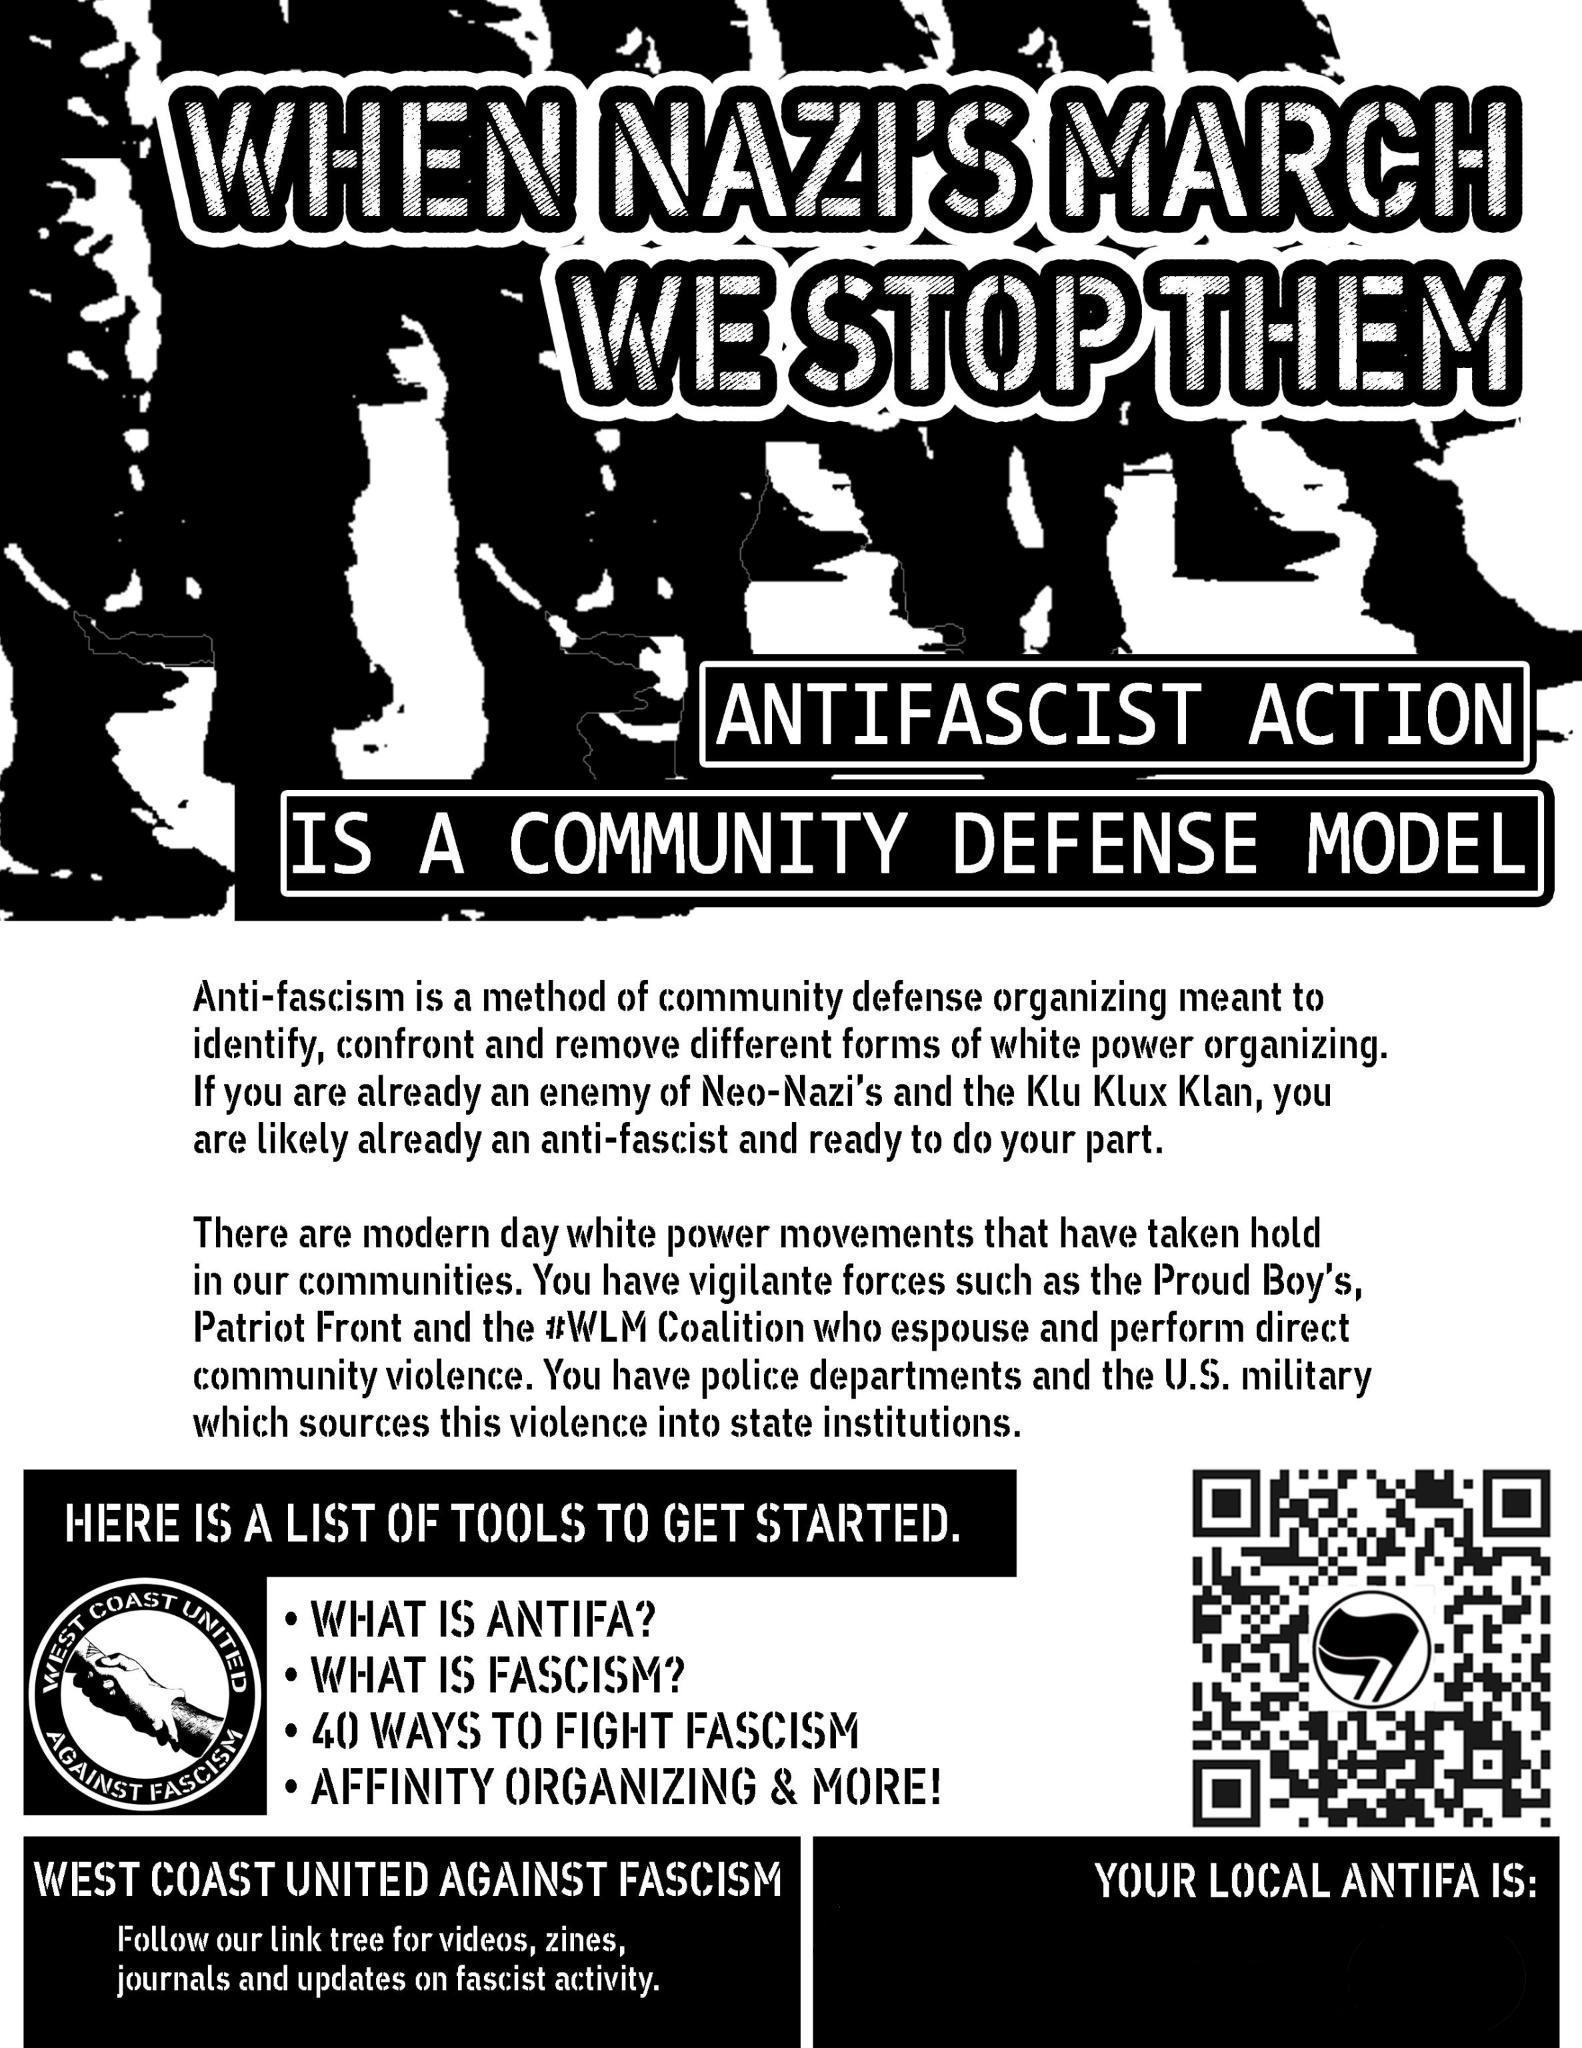 WHEN NAZI'S MARCH WE STOP THEM ANTIFASCIST ACTION IS A COMMUNITY DEFENSE MODEL Anti-fascism is a method of community defense organizing meant to identify, confront and remove different forms of white power organizing. If you are already an enemy of Neo-Nazi's and the Klu Klux Klan, you are likely already an anti-fascist and ready to do your part. There are modern day white power movements that have taken hold in our communities. You have vigilante forces such as the Proud Boy's, Patriot Front and the #WLM Coalition who espouse and perform direct community violence. You have police departments and the U.S. military which sources this violence into state institutions. HERE IS A LIST OF TOOLS TO GET STARTED. COAS • WHAT IS ANTIFA? • WHAT IS FASCISM? • 40 WAYS TO FIGHT FASCISM • AFFINITY ORGANIZING & MORE! WEST COAST UNITED AGAINST FASCISM Follow our link tree for videos, zines, journals and updates on fascist activity. YOUR LOCAL ANTIFA IS